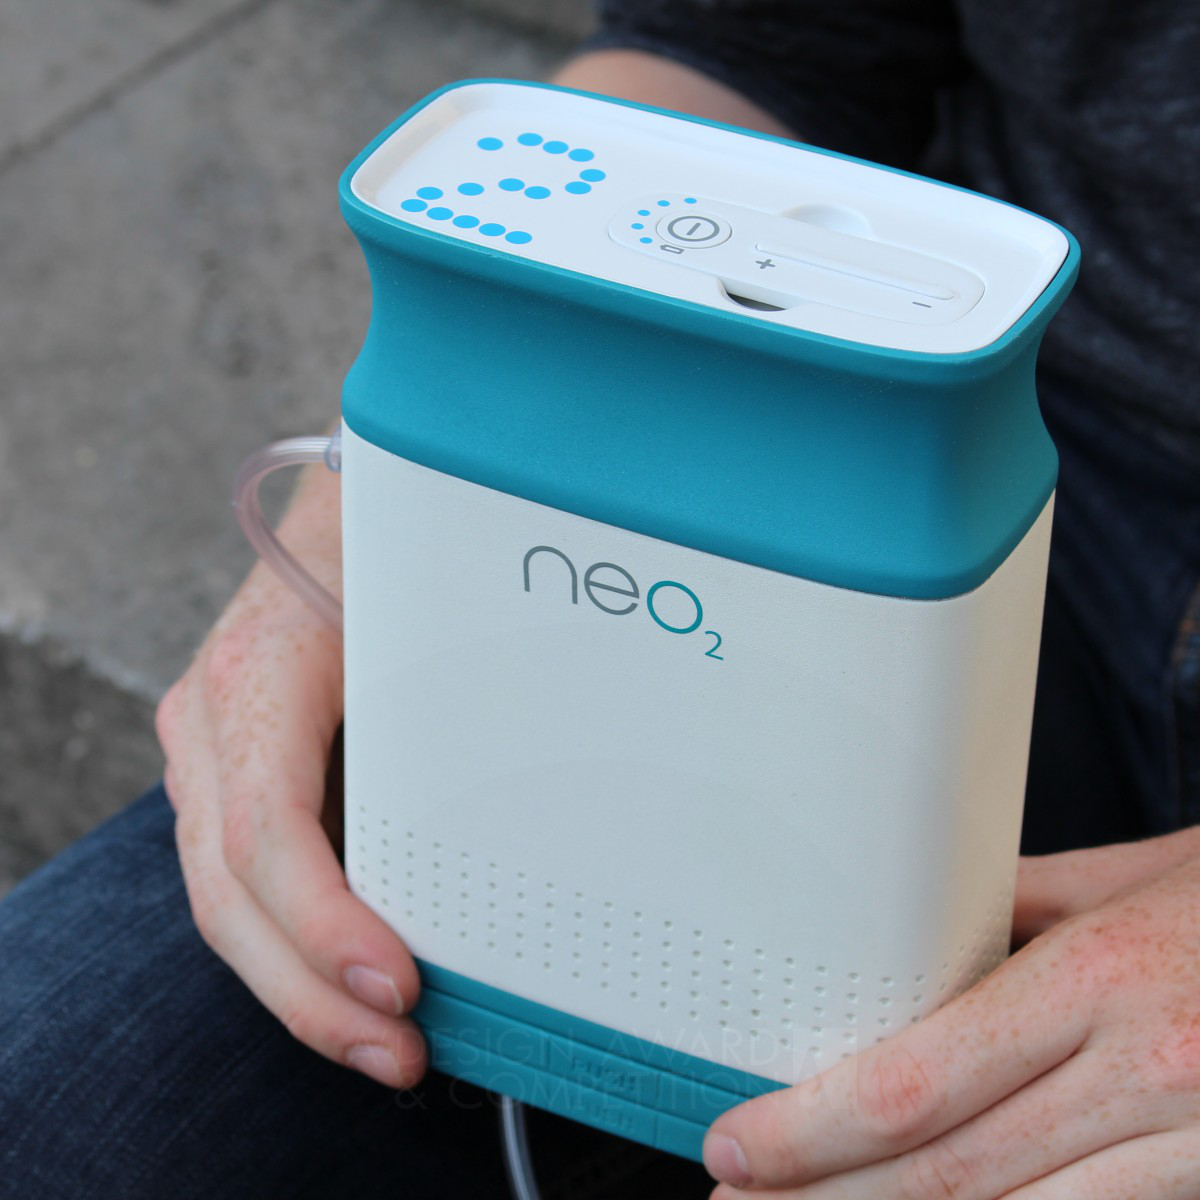 neo2 mobile oxygen concentrator by Julia Regnath